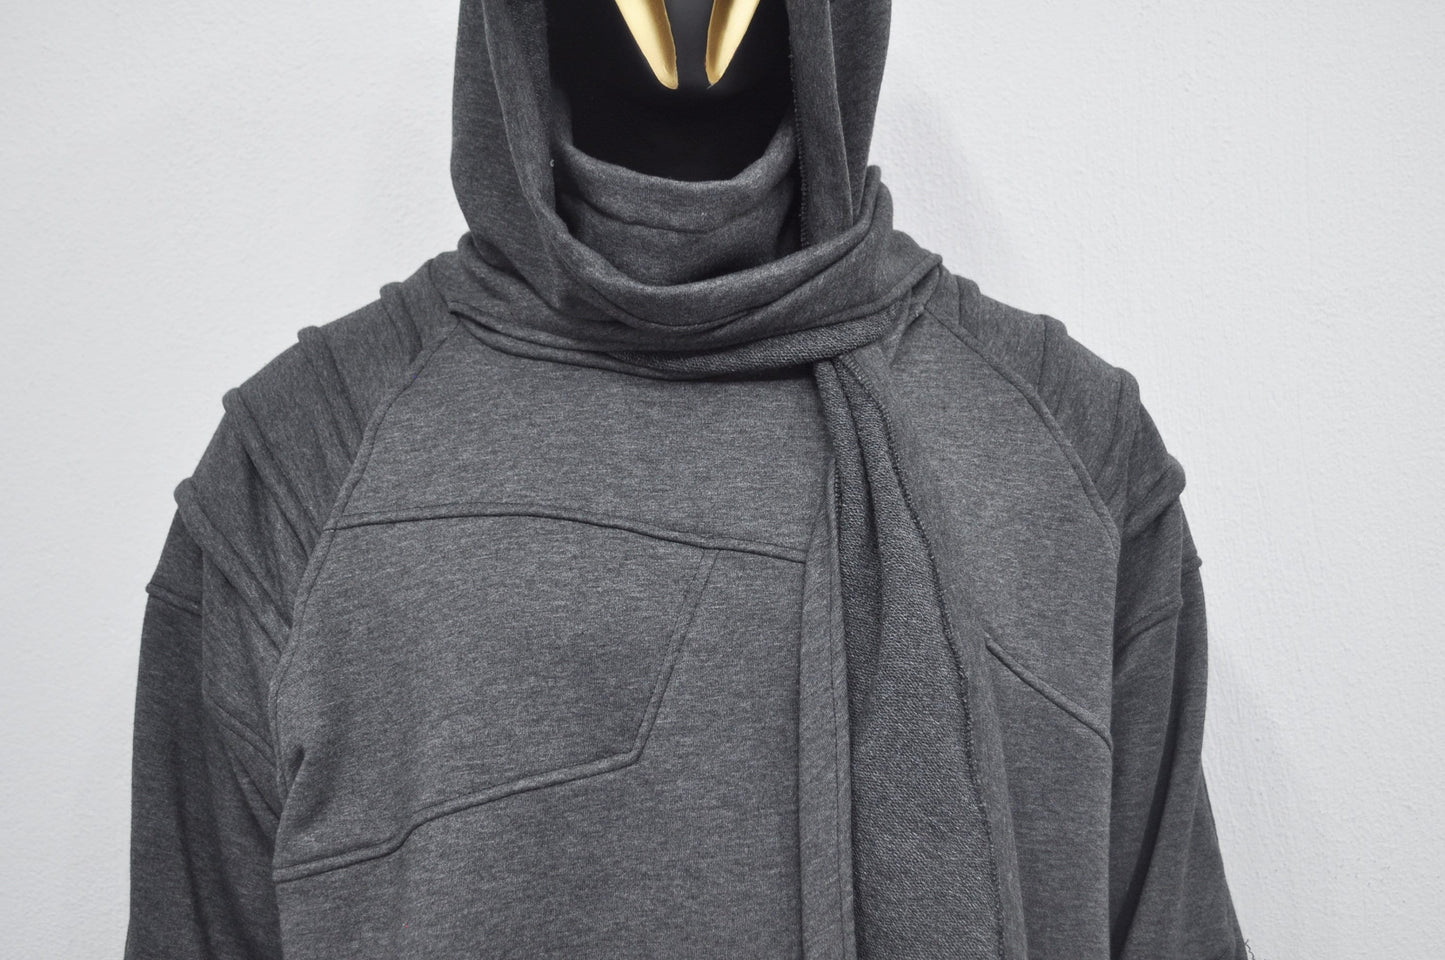 XS-8XL Washed Look Distressed Scarf Oversize Hood,High Neck Pullover,Ninja Assassin Jacket,Steampunk Gothi-Post Apocalyptic Dystopian-BB0157